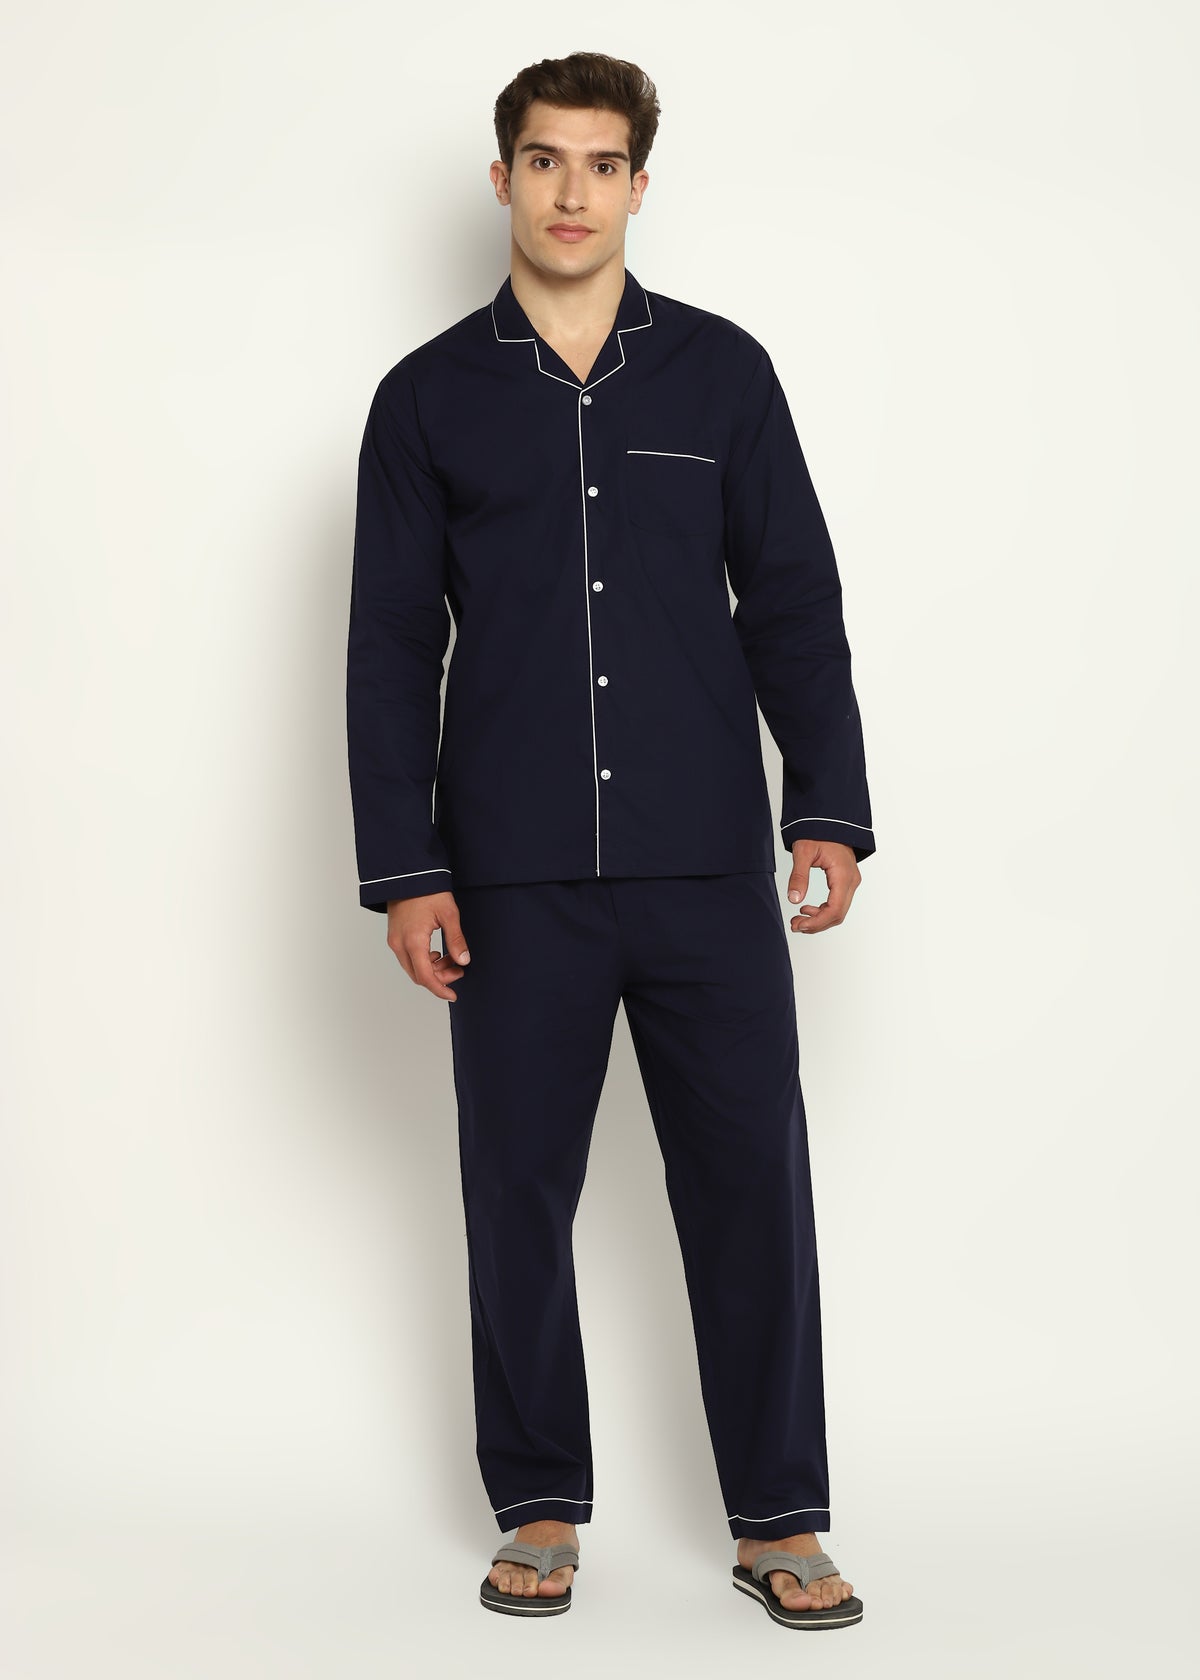 Navy Cotton with White Piping Men's Night Suit - Shopbloom